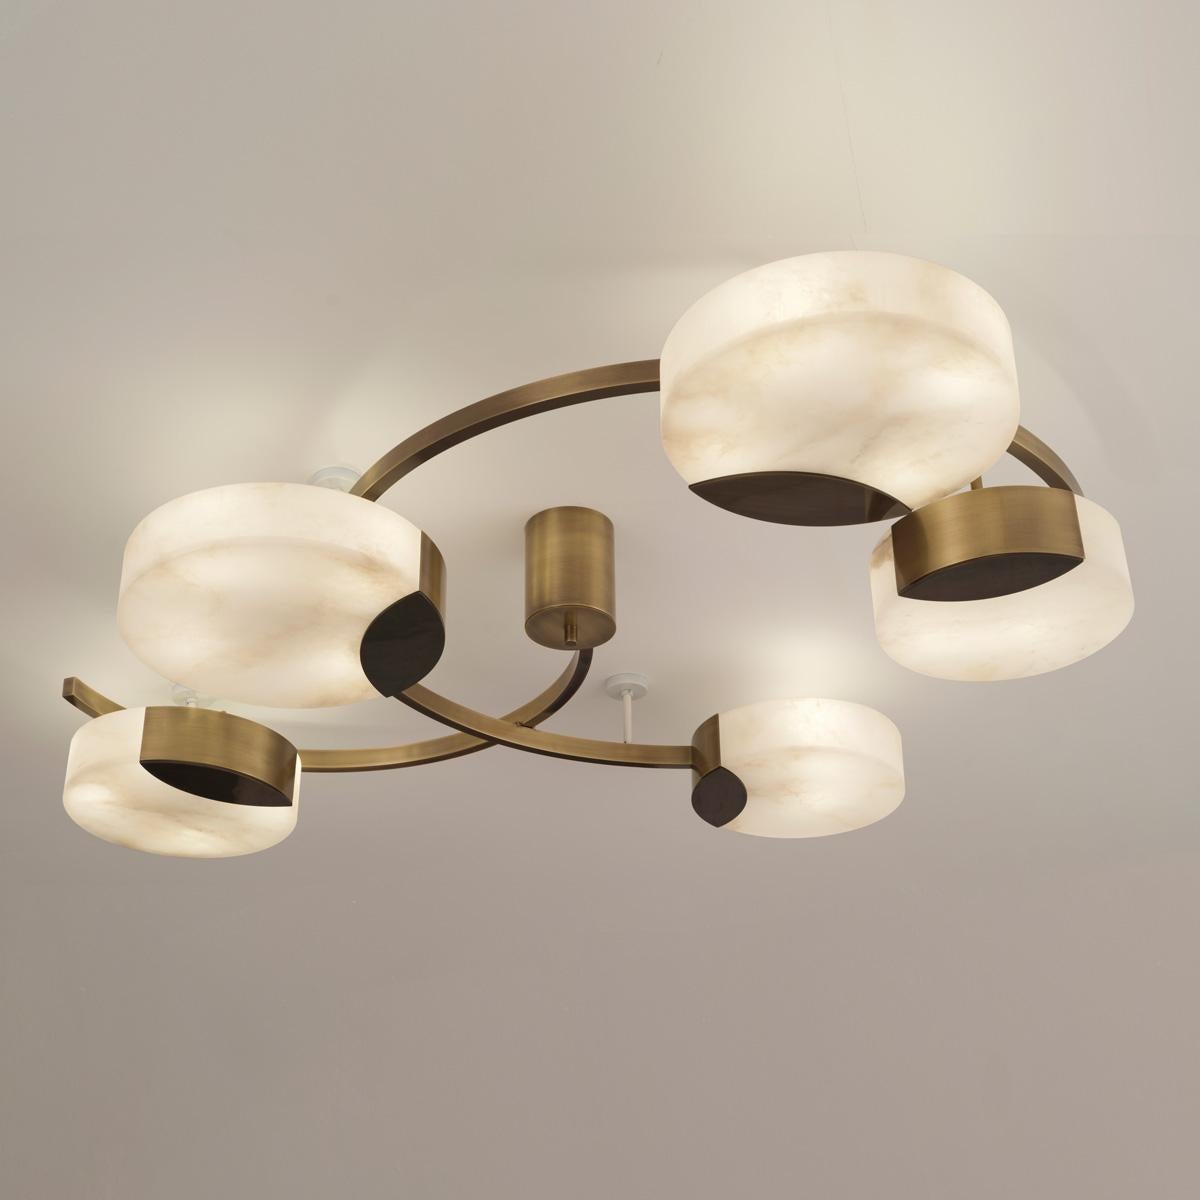 Cloud N.5 Ceiling Light by Gaspare Asaro-Satin Brass Finish For Sale 3